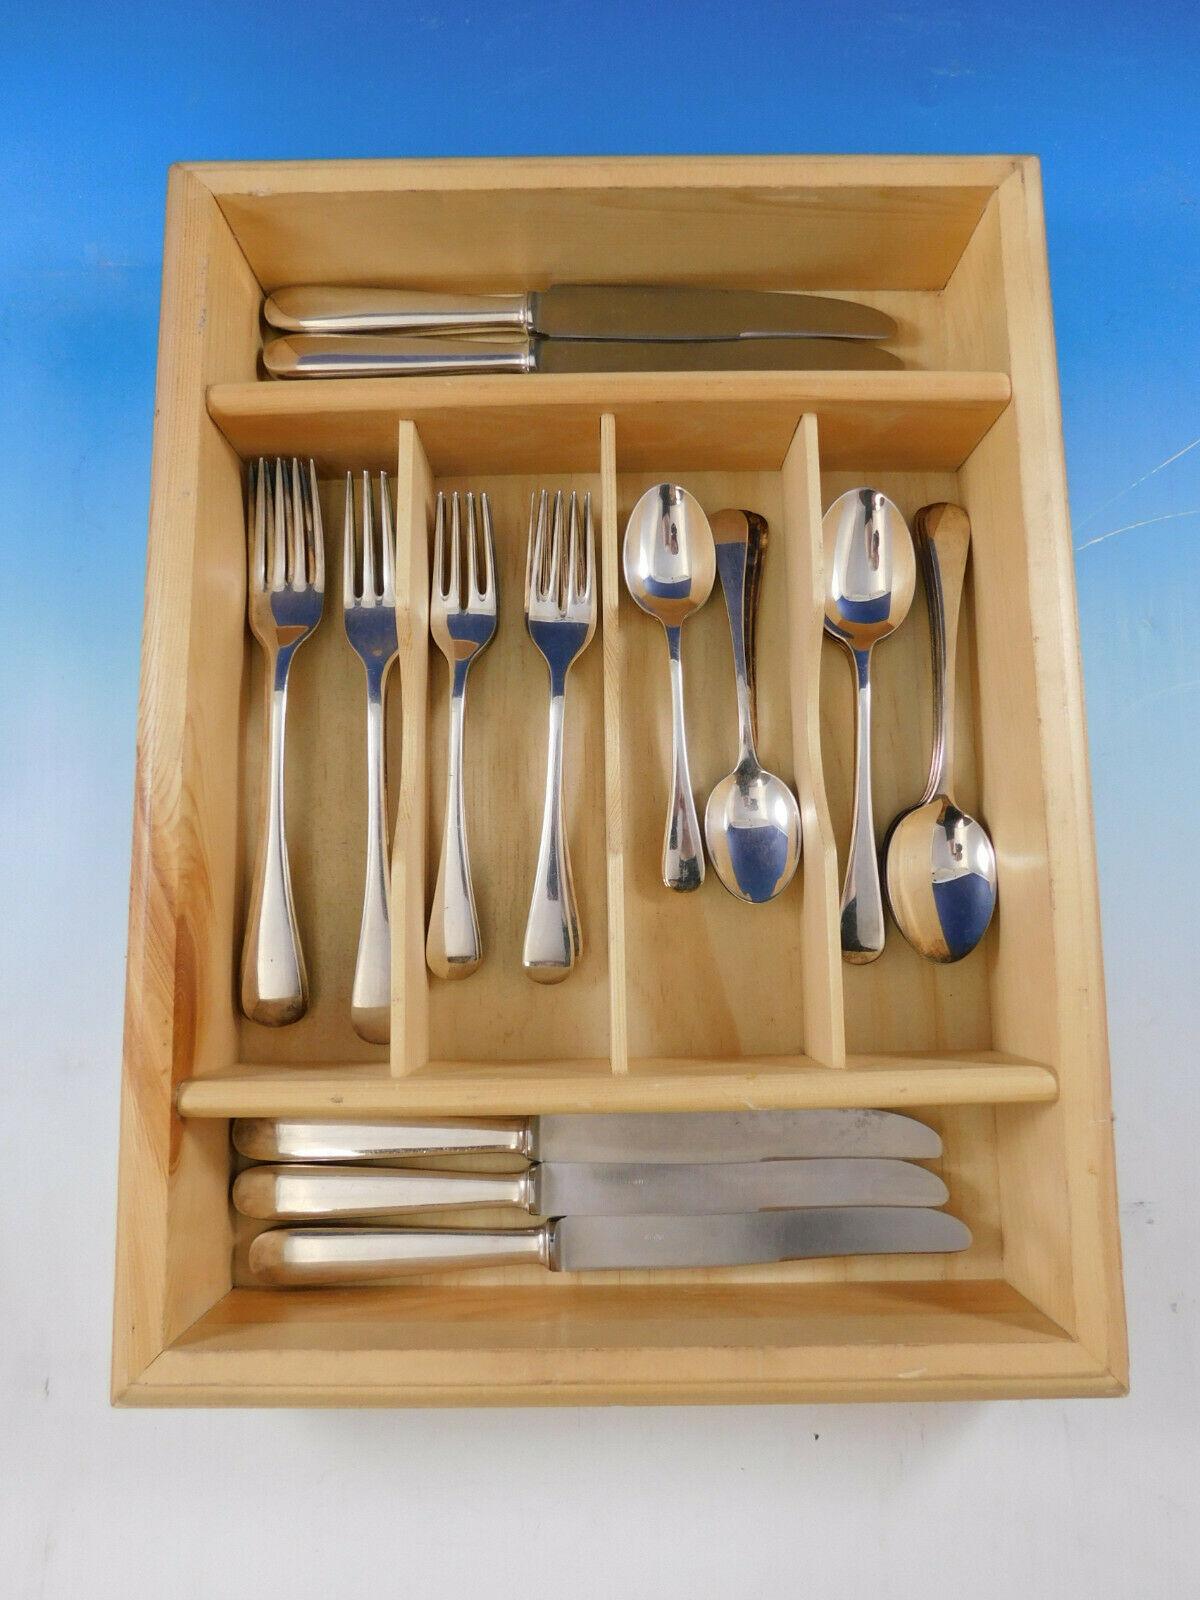 Dinner size Mayfair by Buccellati Italy silver plated flatware set, 30 pieces. This set includes:

6 dinner size knives, 9 1/2